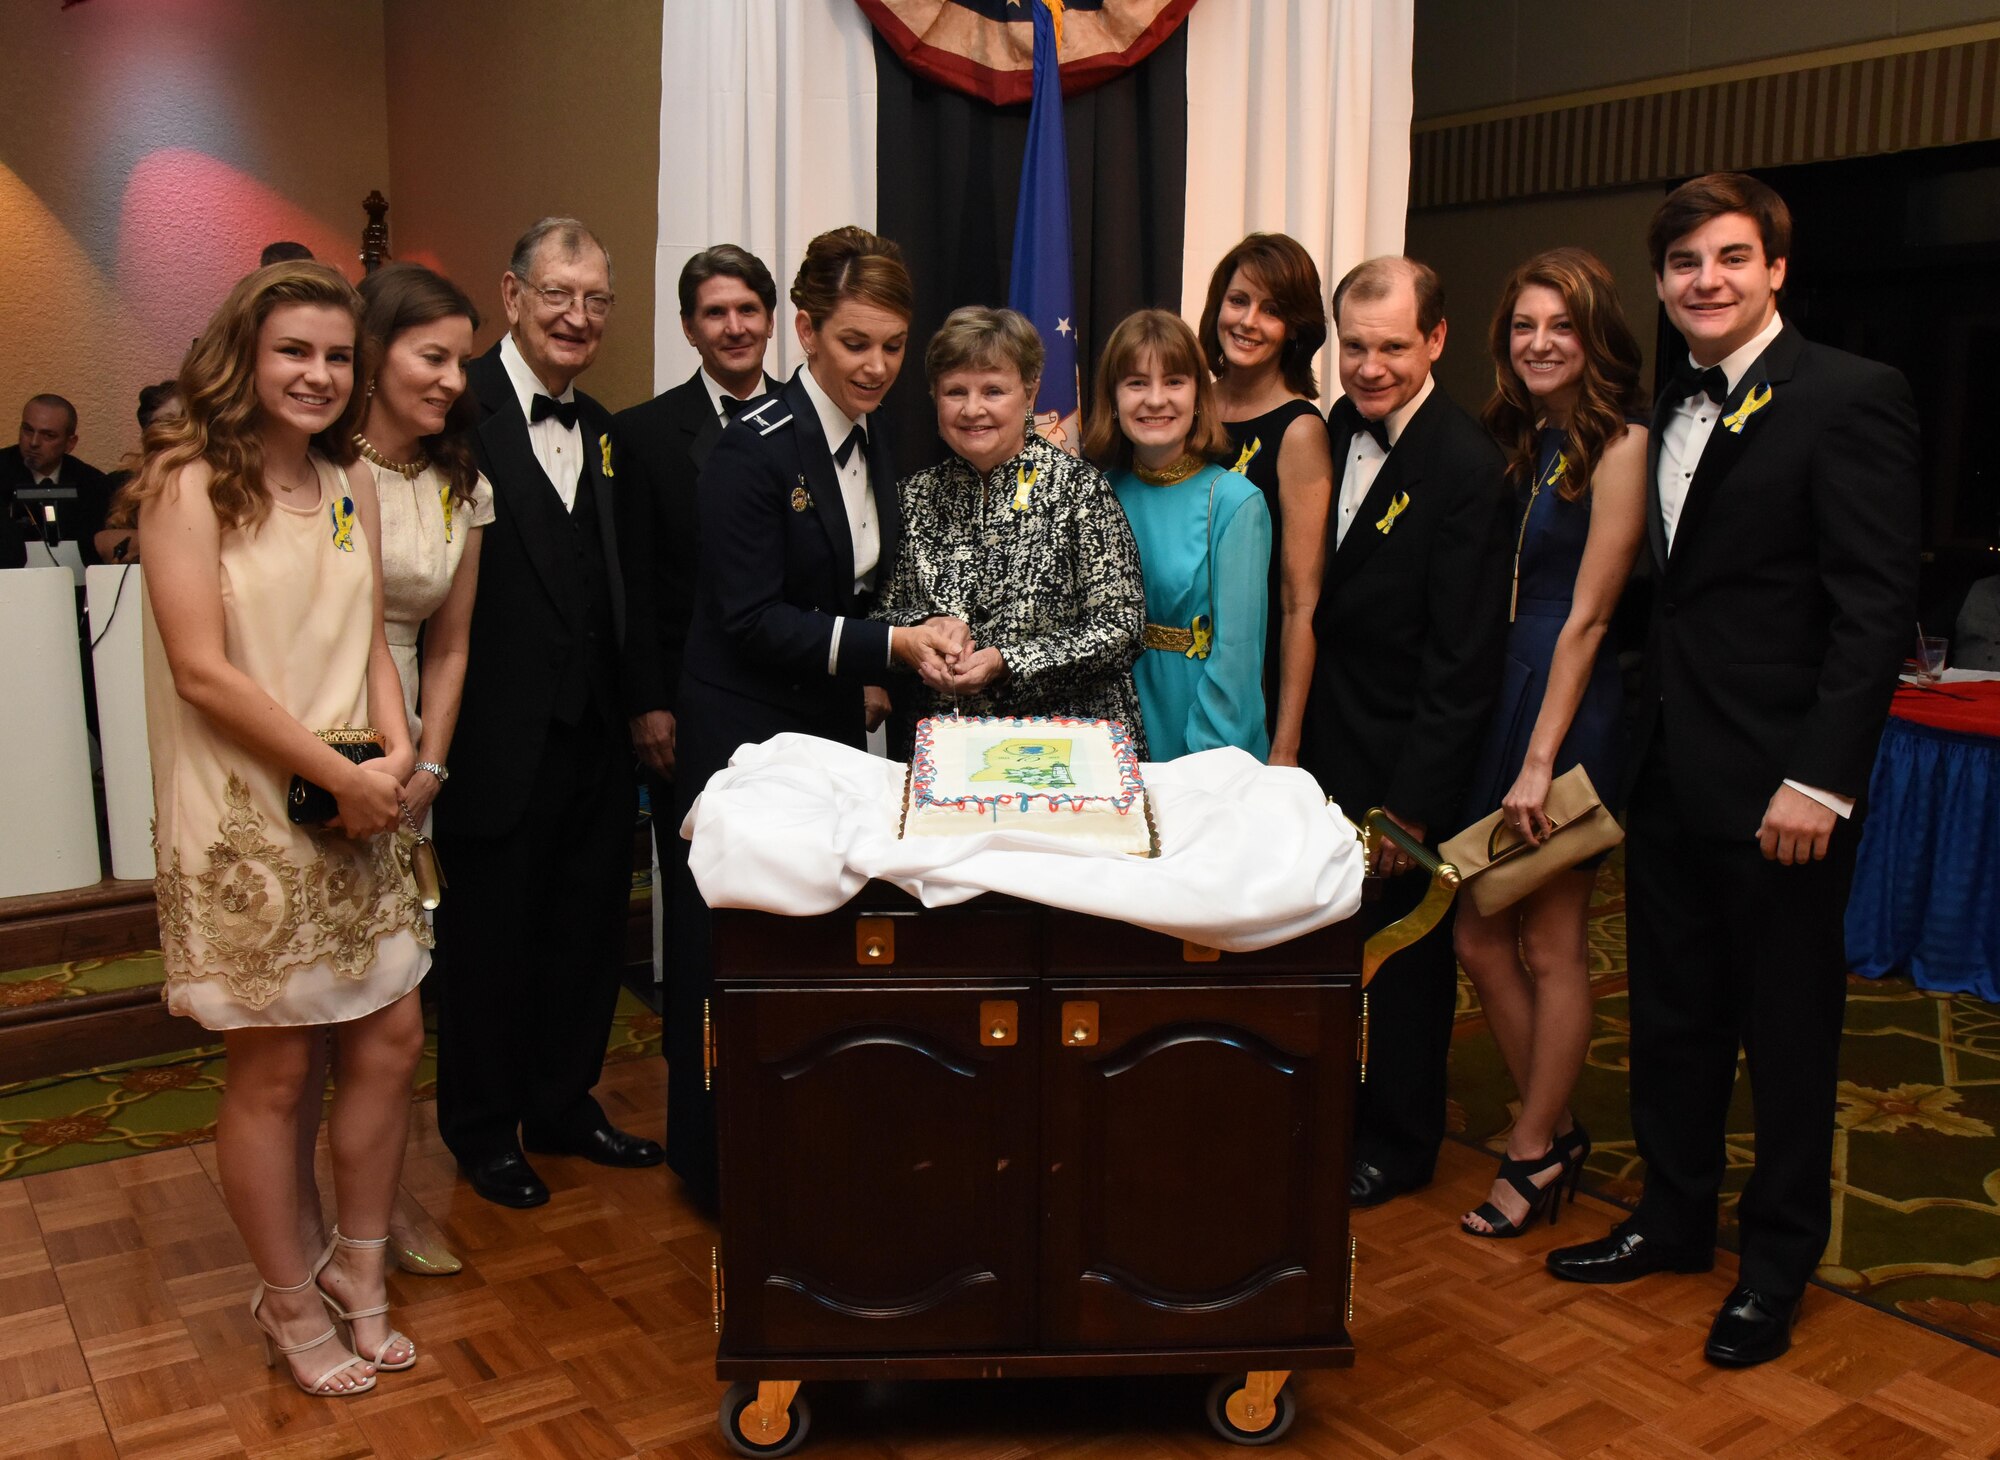 Col. Michele Edmondson, 81st Training Wing commander, participates in a cake cutting ceremony with family members of Lt. Samuel Keesler, Jr., during the installation’s 75th Anniversary Gala at the Bay Breeze Event Center Nov. 4, 2016, on Keesler Air Force Base, Miss. The celebration commemorated Keesler’s 75 years of history with historical displays, throwback trivia and musical and dance performances. (U.S. Air Force photo by Kemberly Groue/Released)